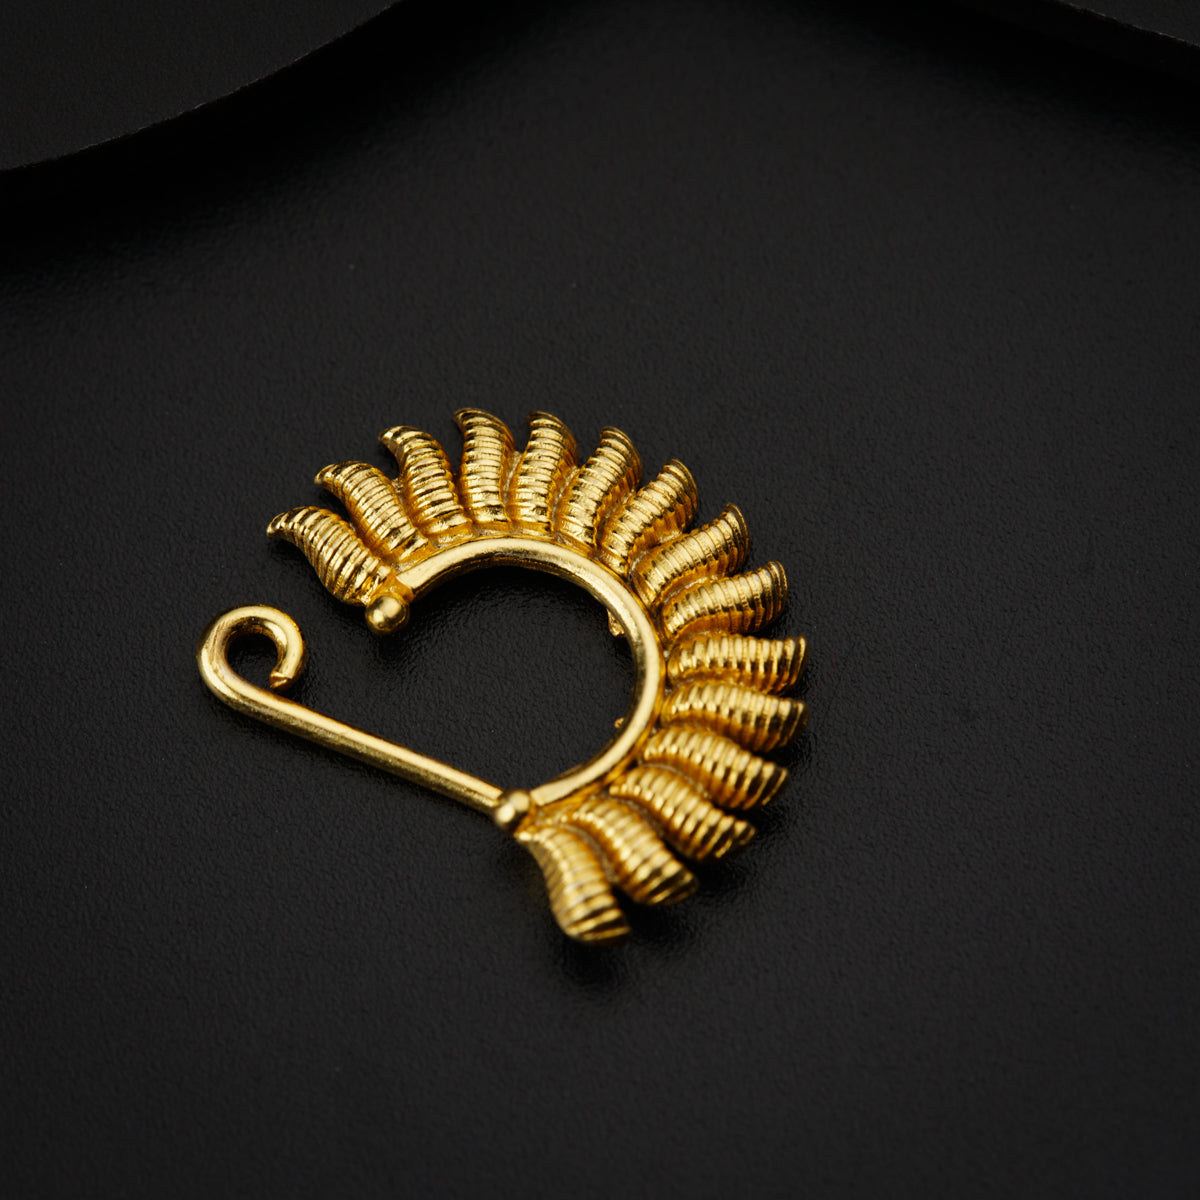 a gold brooch with a spiral design on it